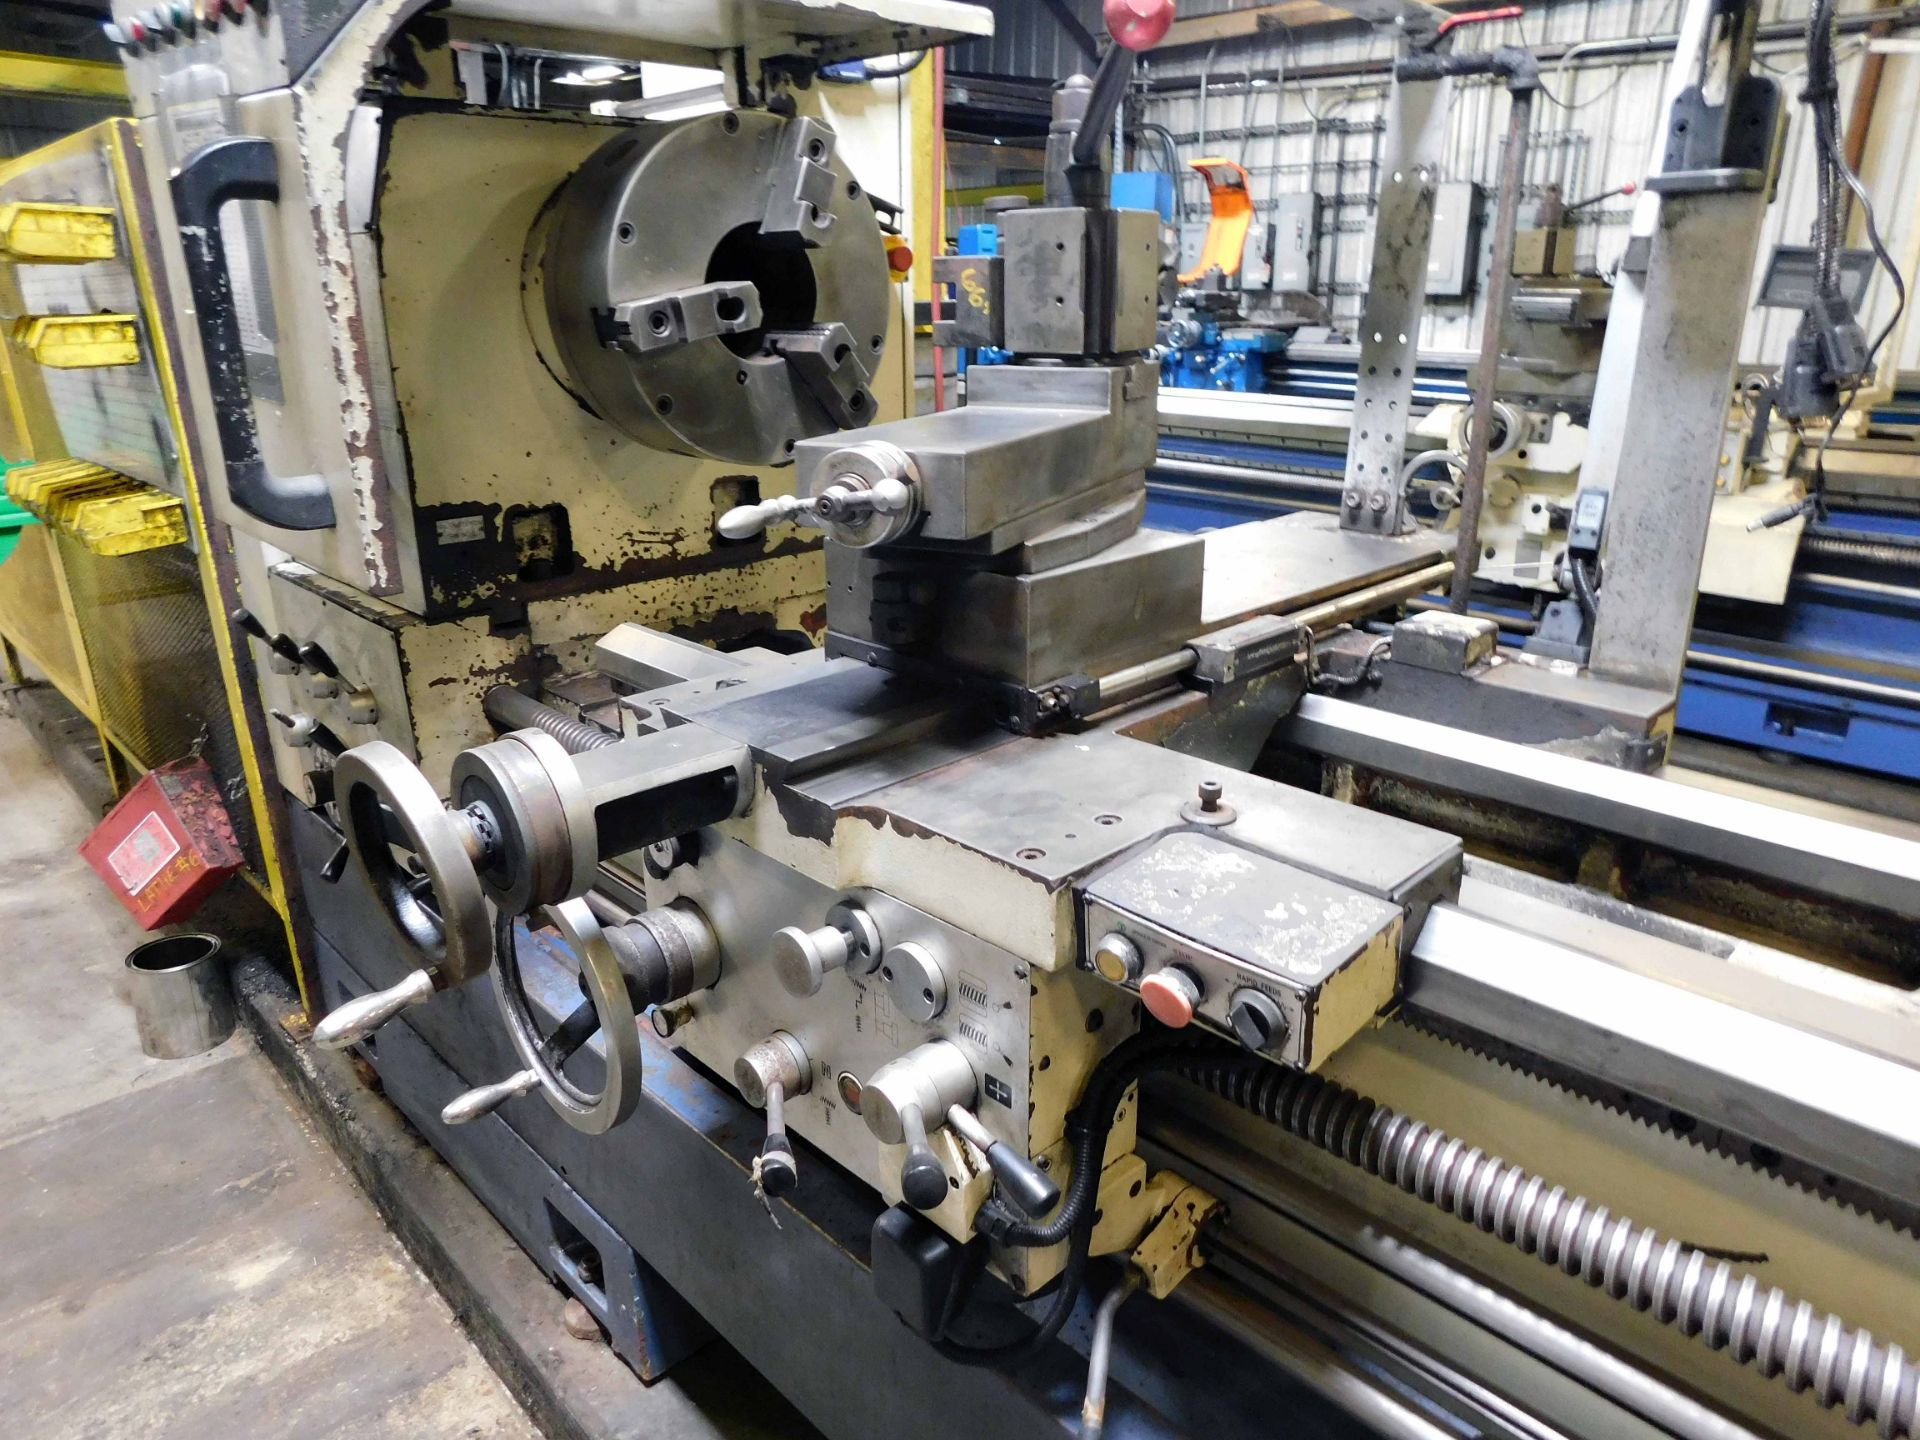 GAP BED ENGINE LATHE, SUMMIT 30” X 200” MDL. 30-6X200, new 2014, 22” sw. over crosslide, 6.1” - Image 3 of 4